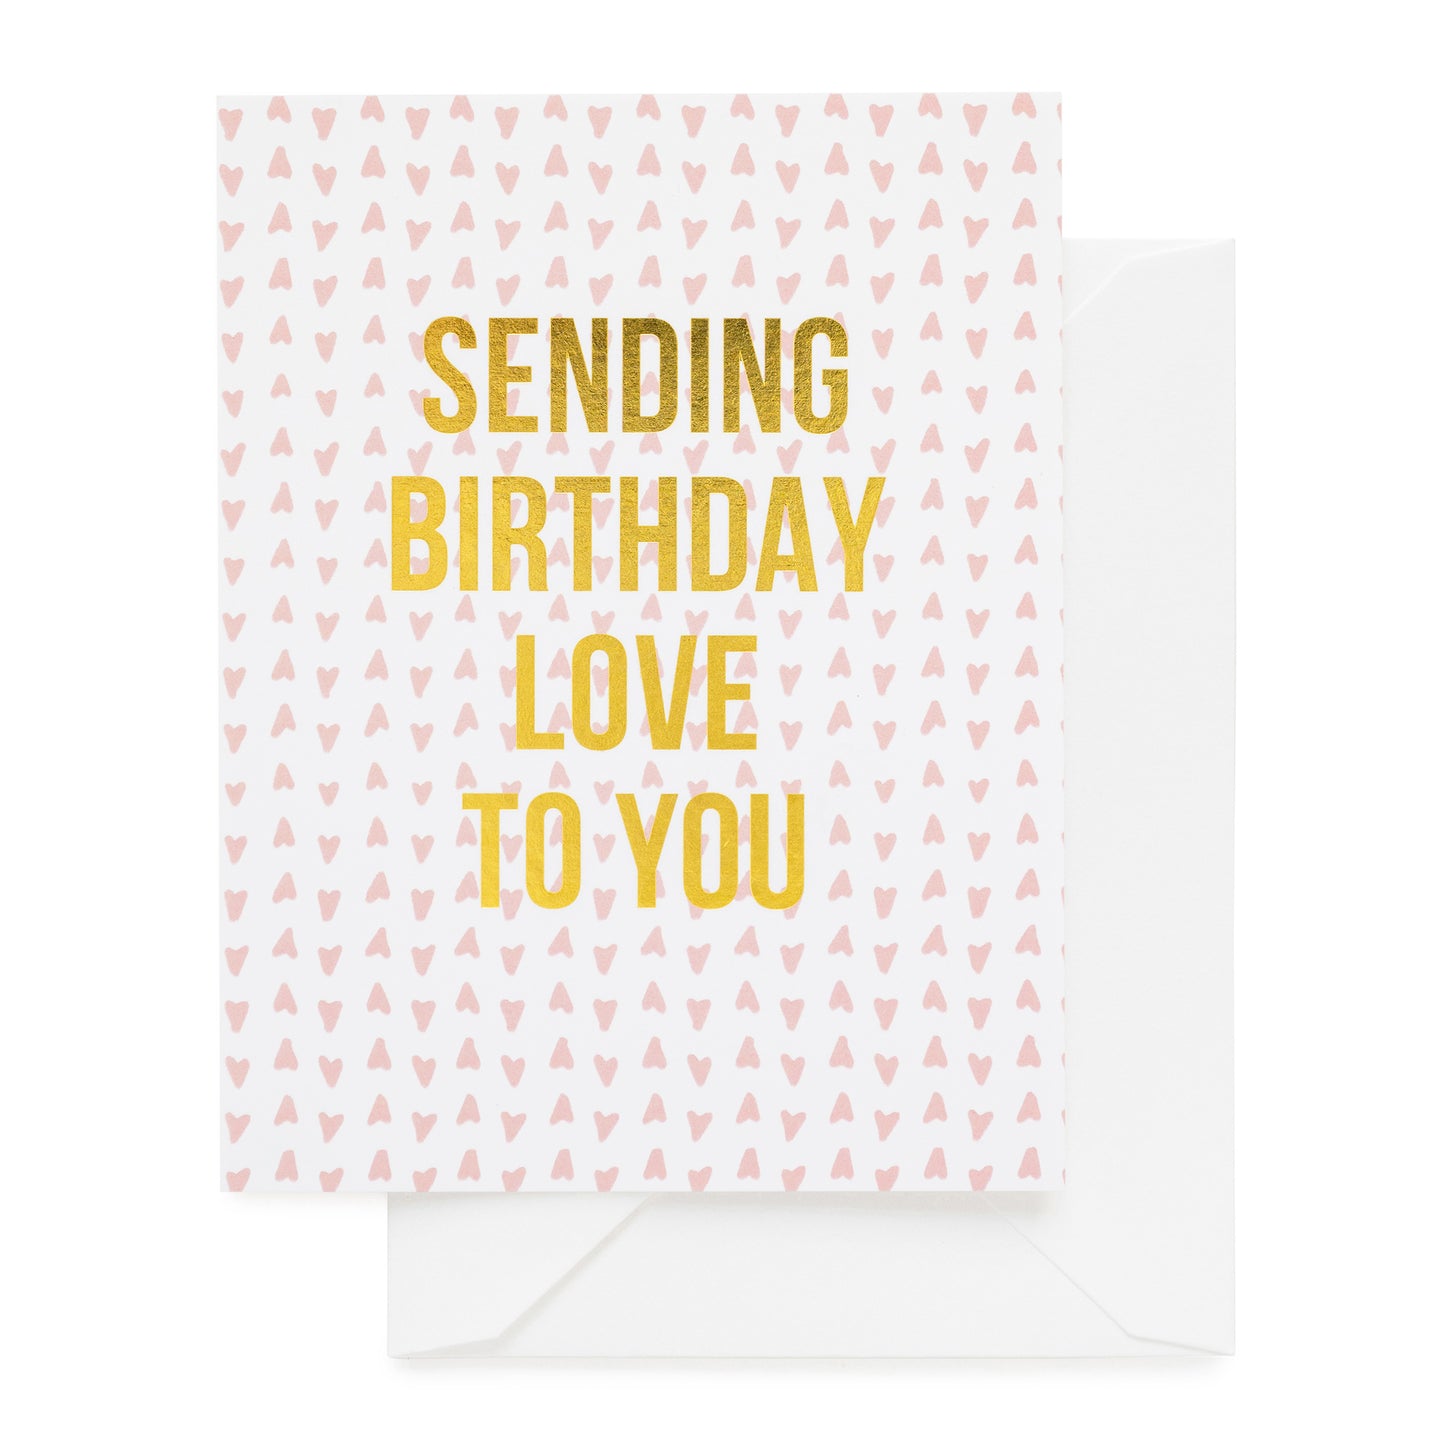 white card with pink heart pattern and gold foil text, white envelope